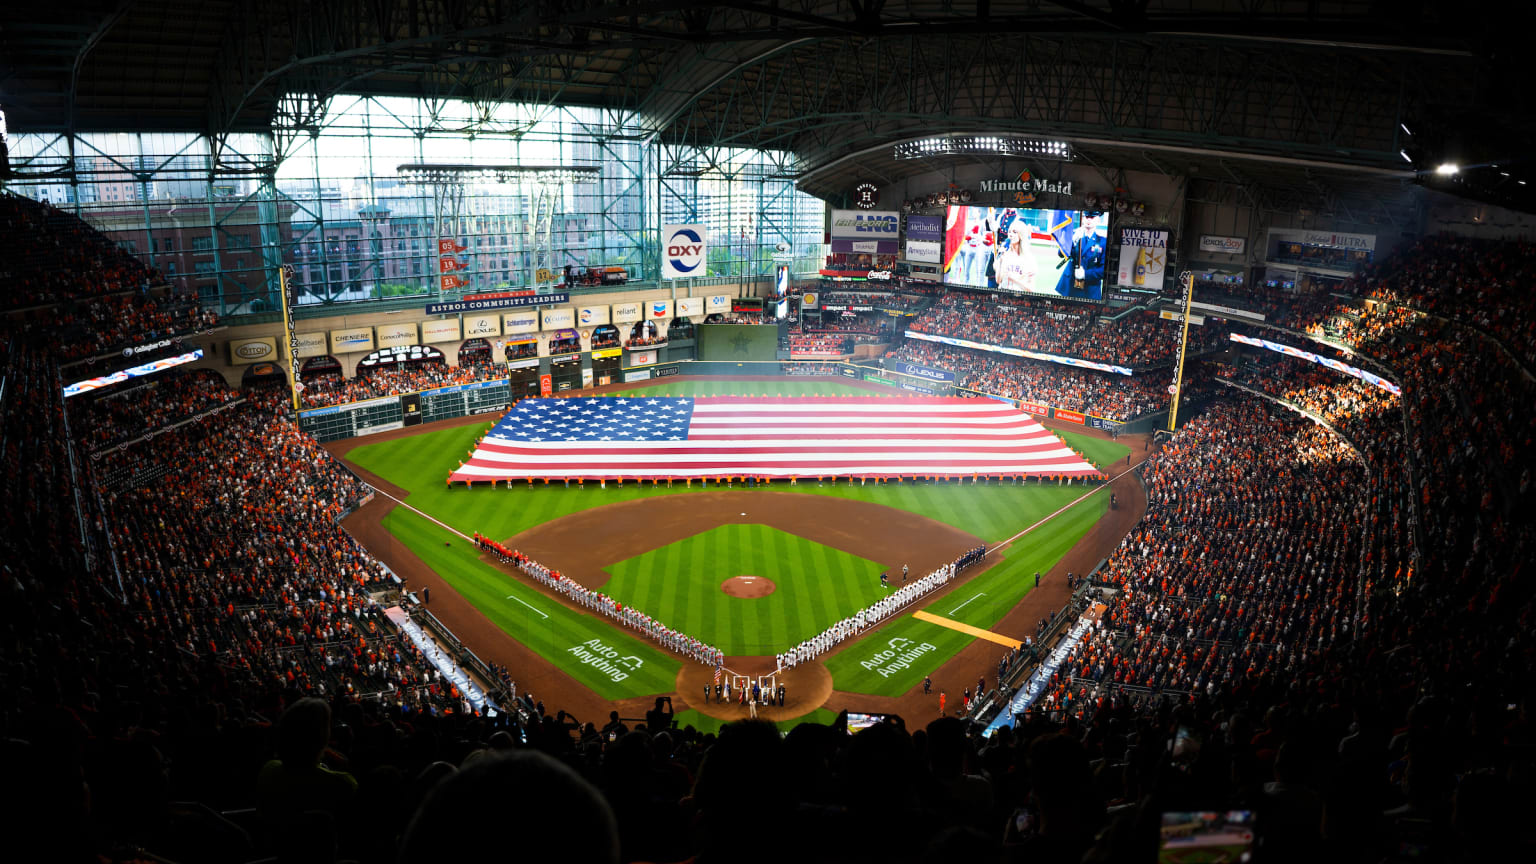 Come with me to the Houston Astros Opening Day. MLB is back